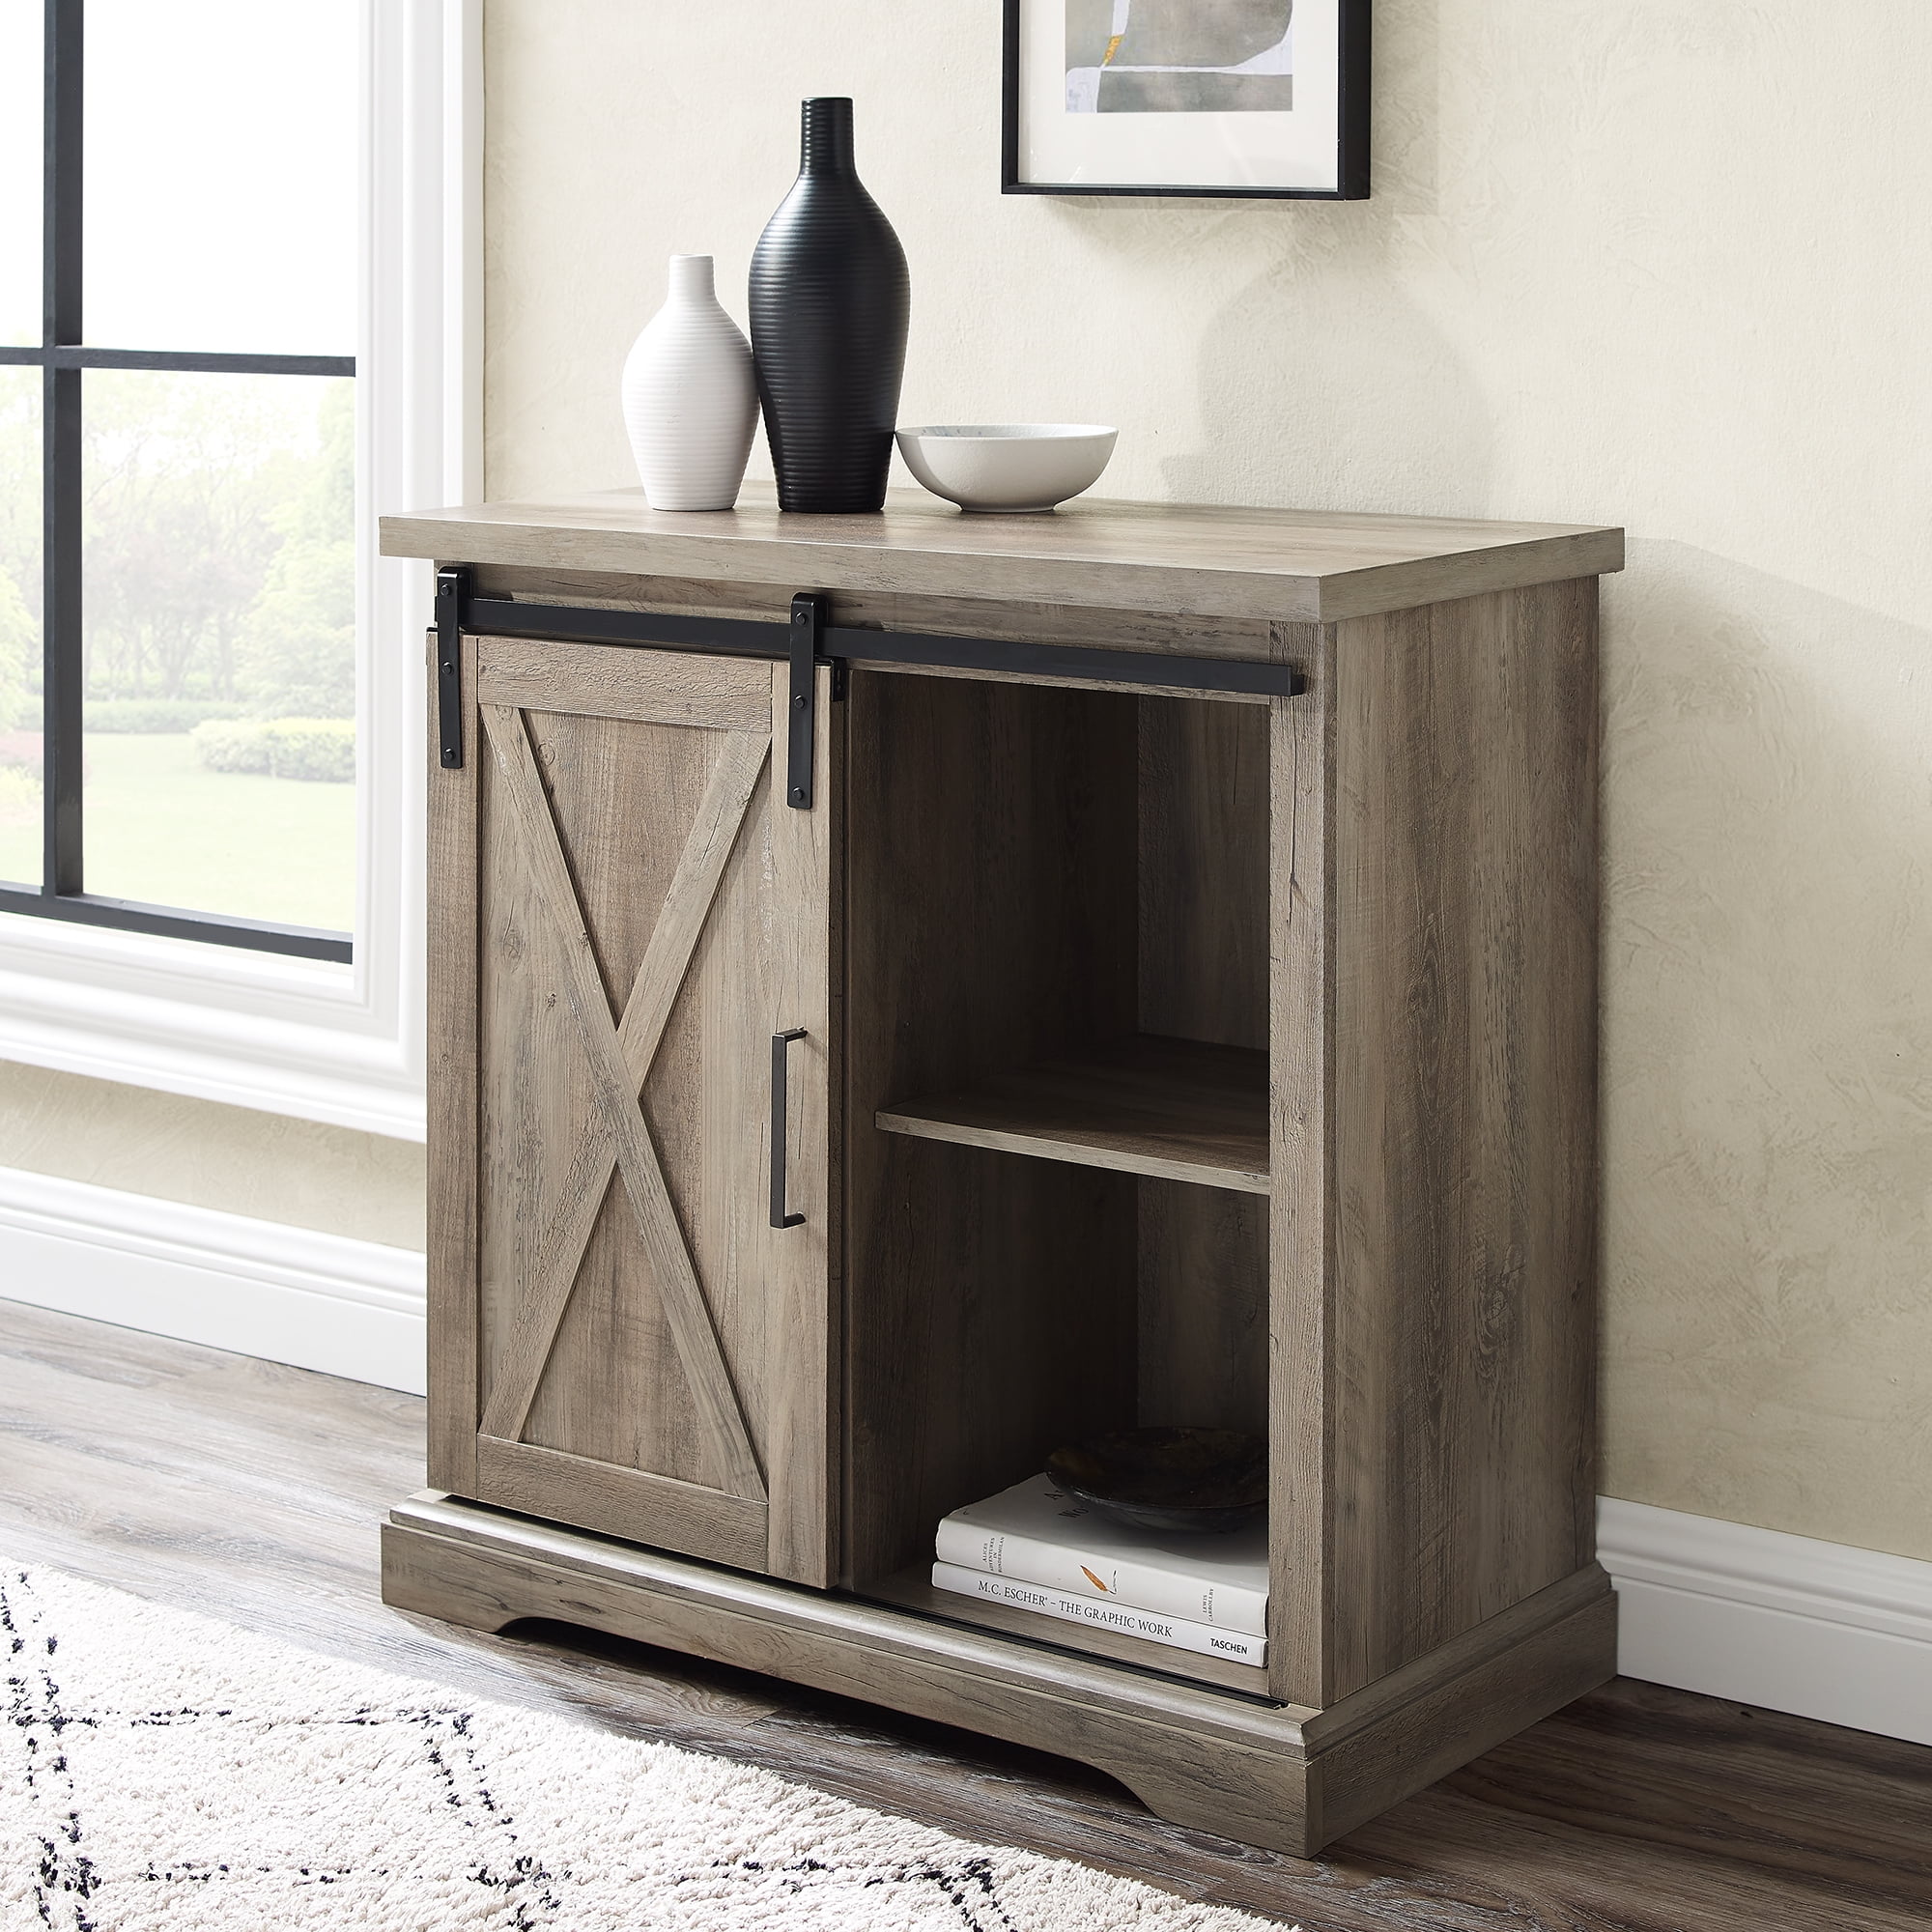 Woven Paths Sliding Barn Door Accent, Small Accent Cabinet With Sliding Doors